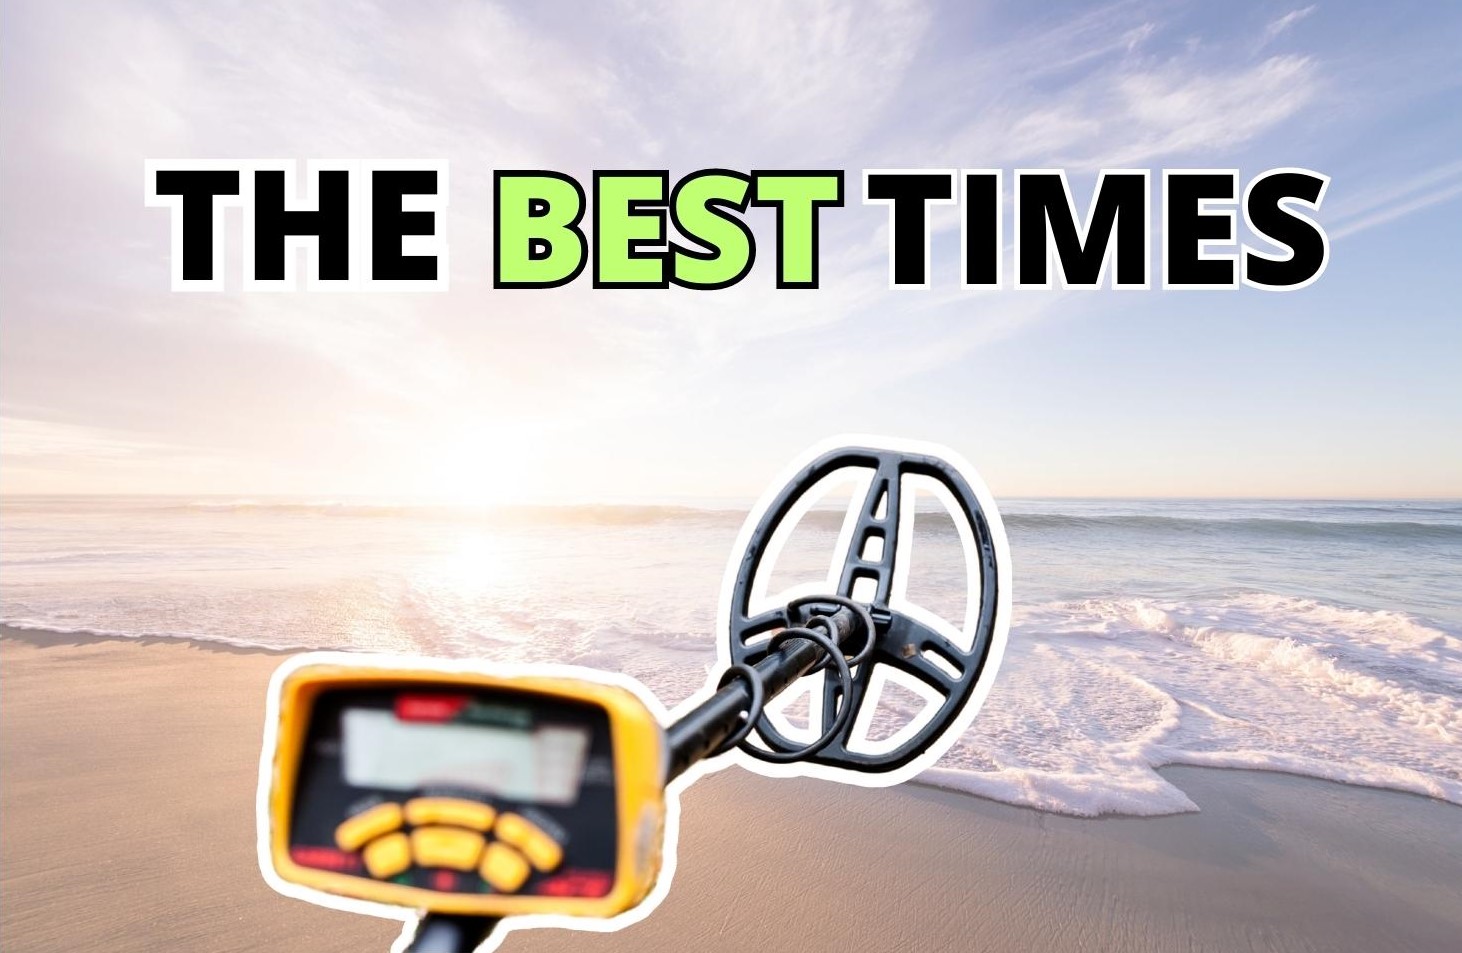 The Best Times for metal detecting on the beach.